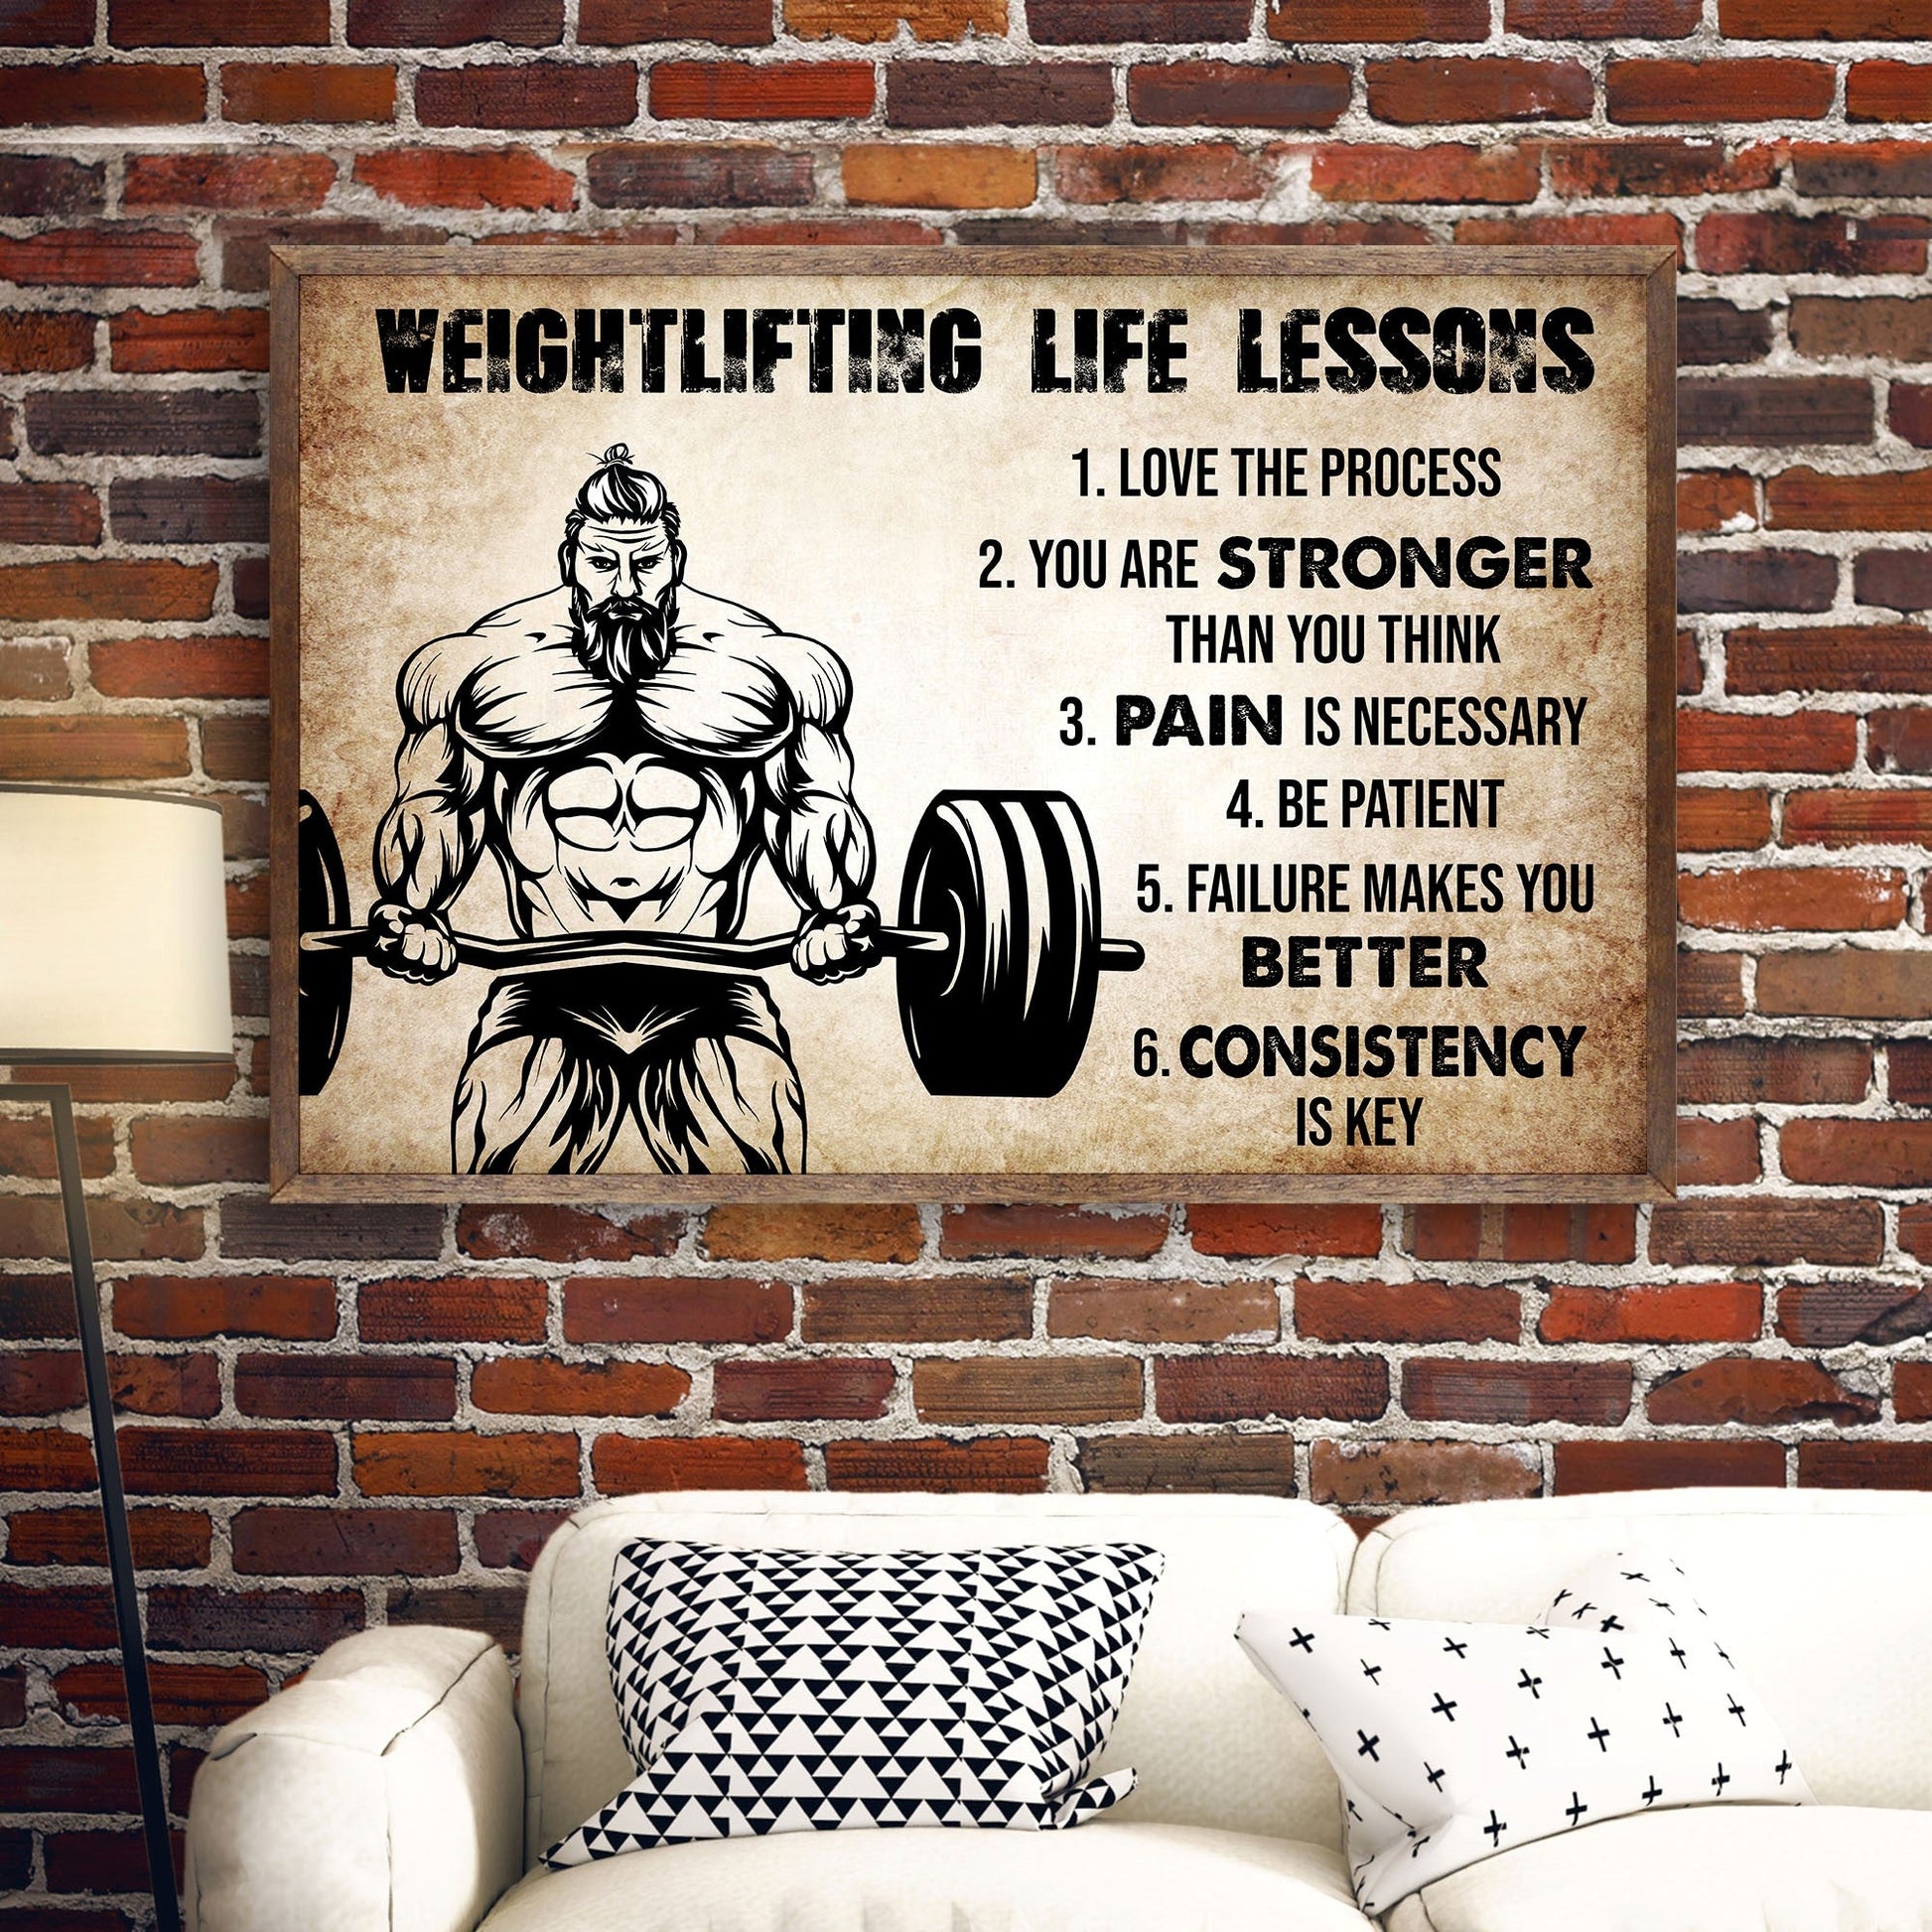 Recovering Powerlifting Addict Funny Gift Idea For Hobby Lover Pun  Sarcastic Quote Fan Gag Canvas Print / Canvas Art by Jeff Creation - Fine  Art America